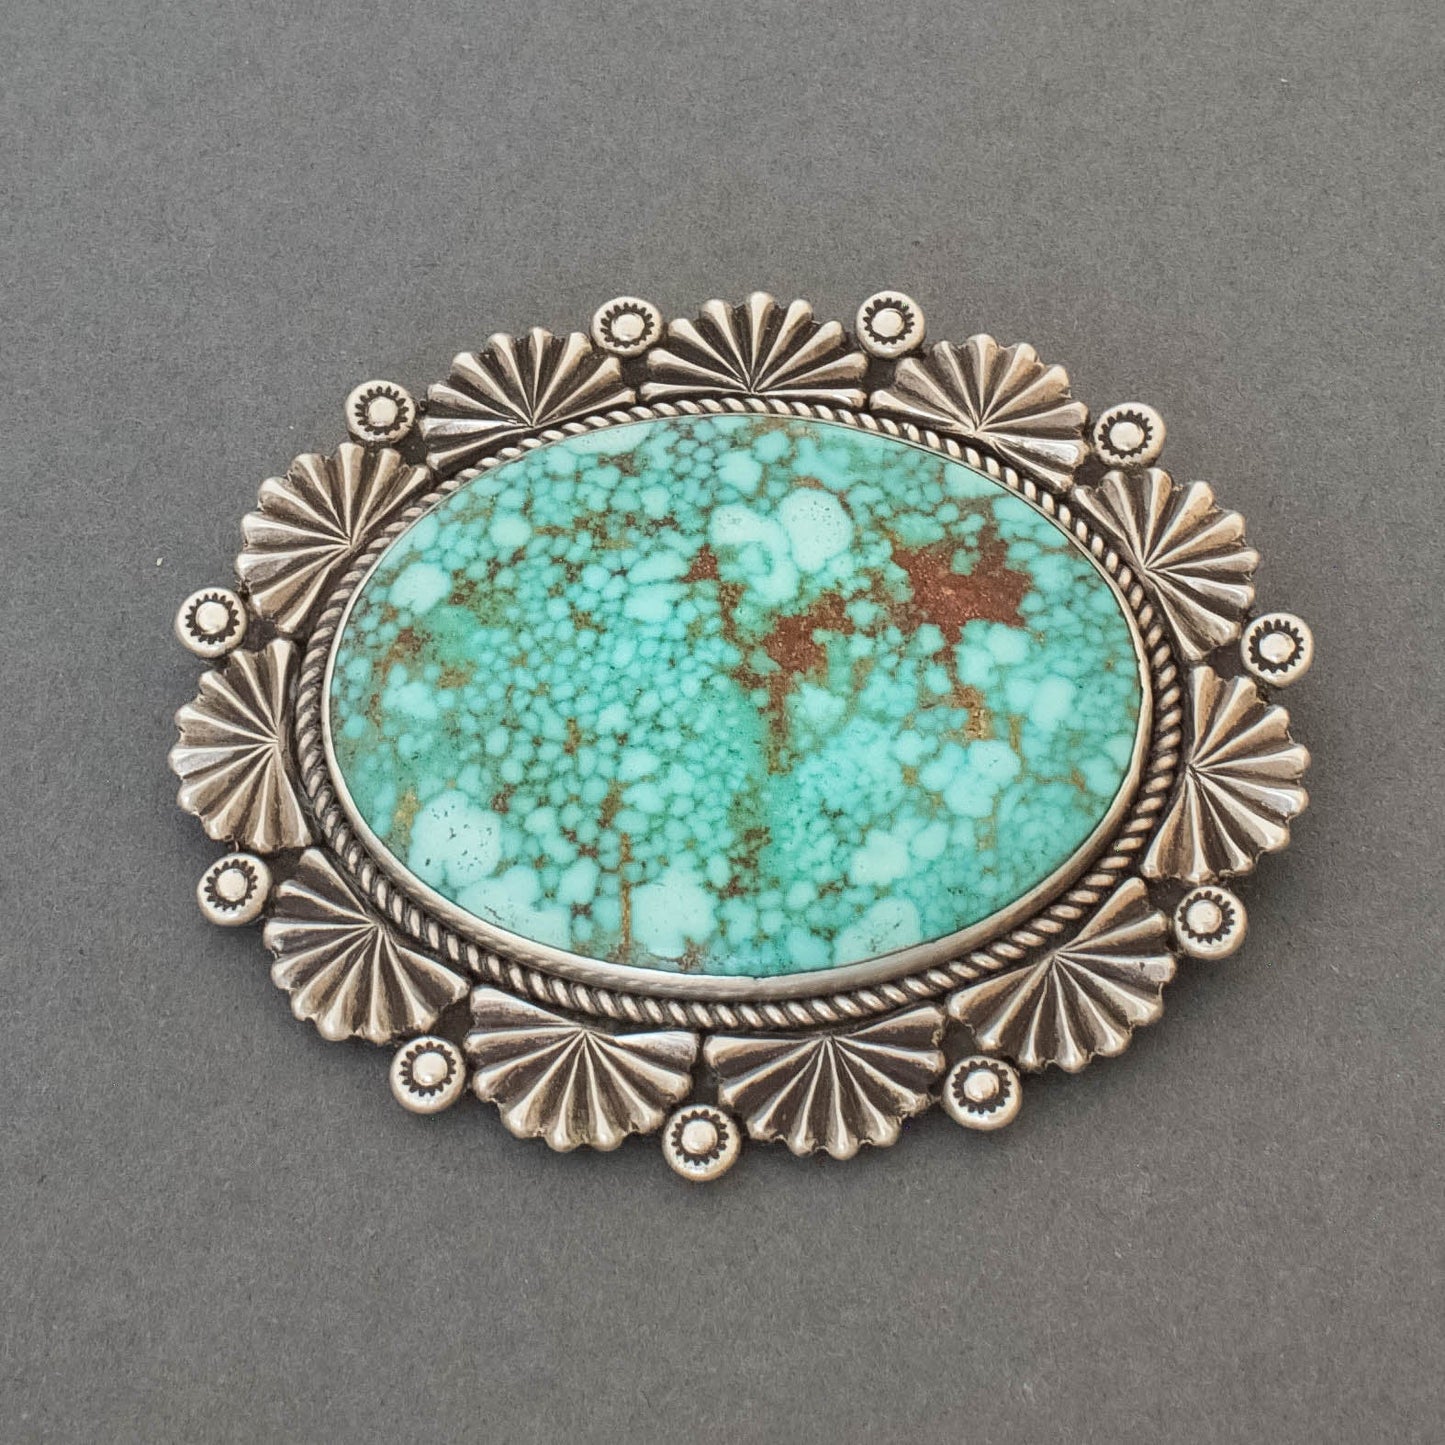 Oval Pin By Perry Shorty of High Grade Natural Turquoise - Turquoise & Tufa